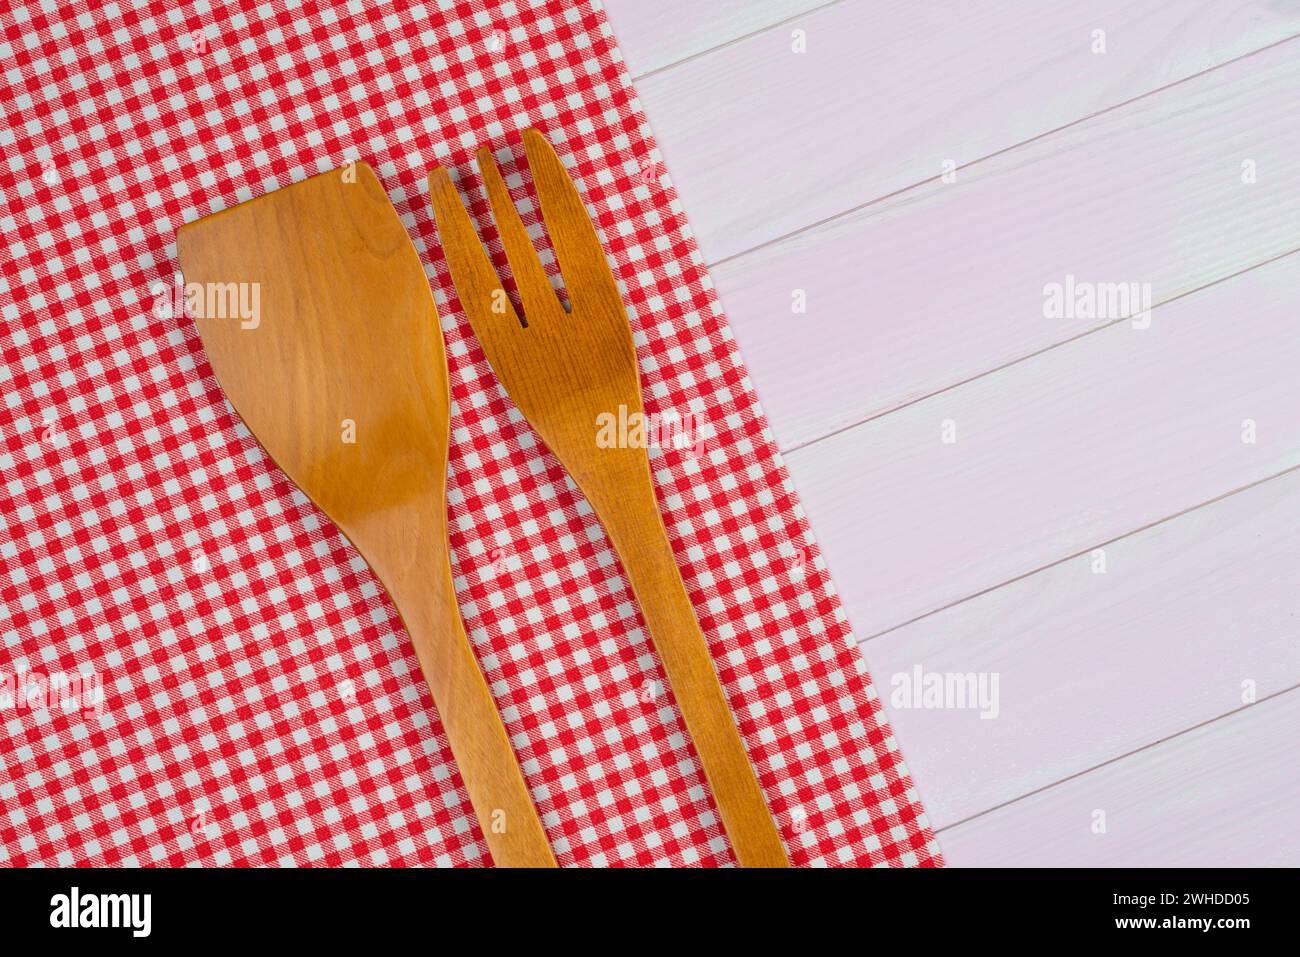 Kitchenware on red towel Stock Photo